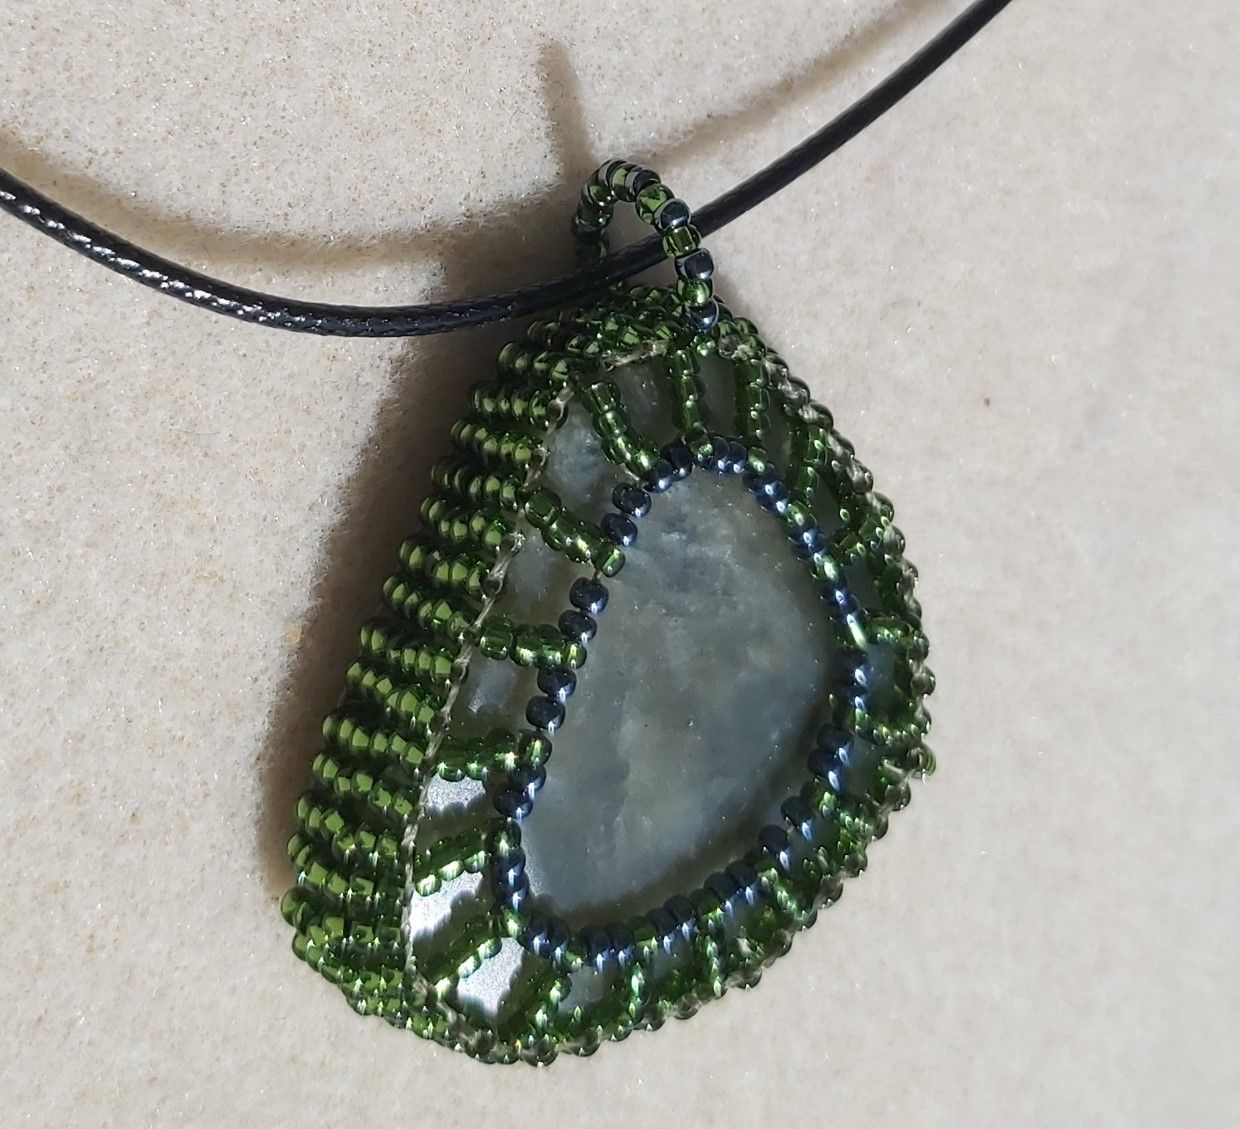 Approx. 70cts of Labradorite Gemstone wrapped in 11/O Olive Seed beads, with 18" Black Cord Chain.